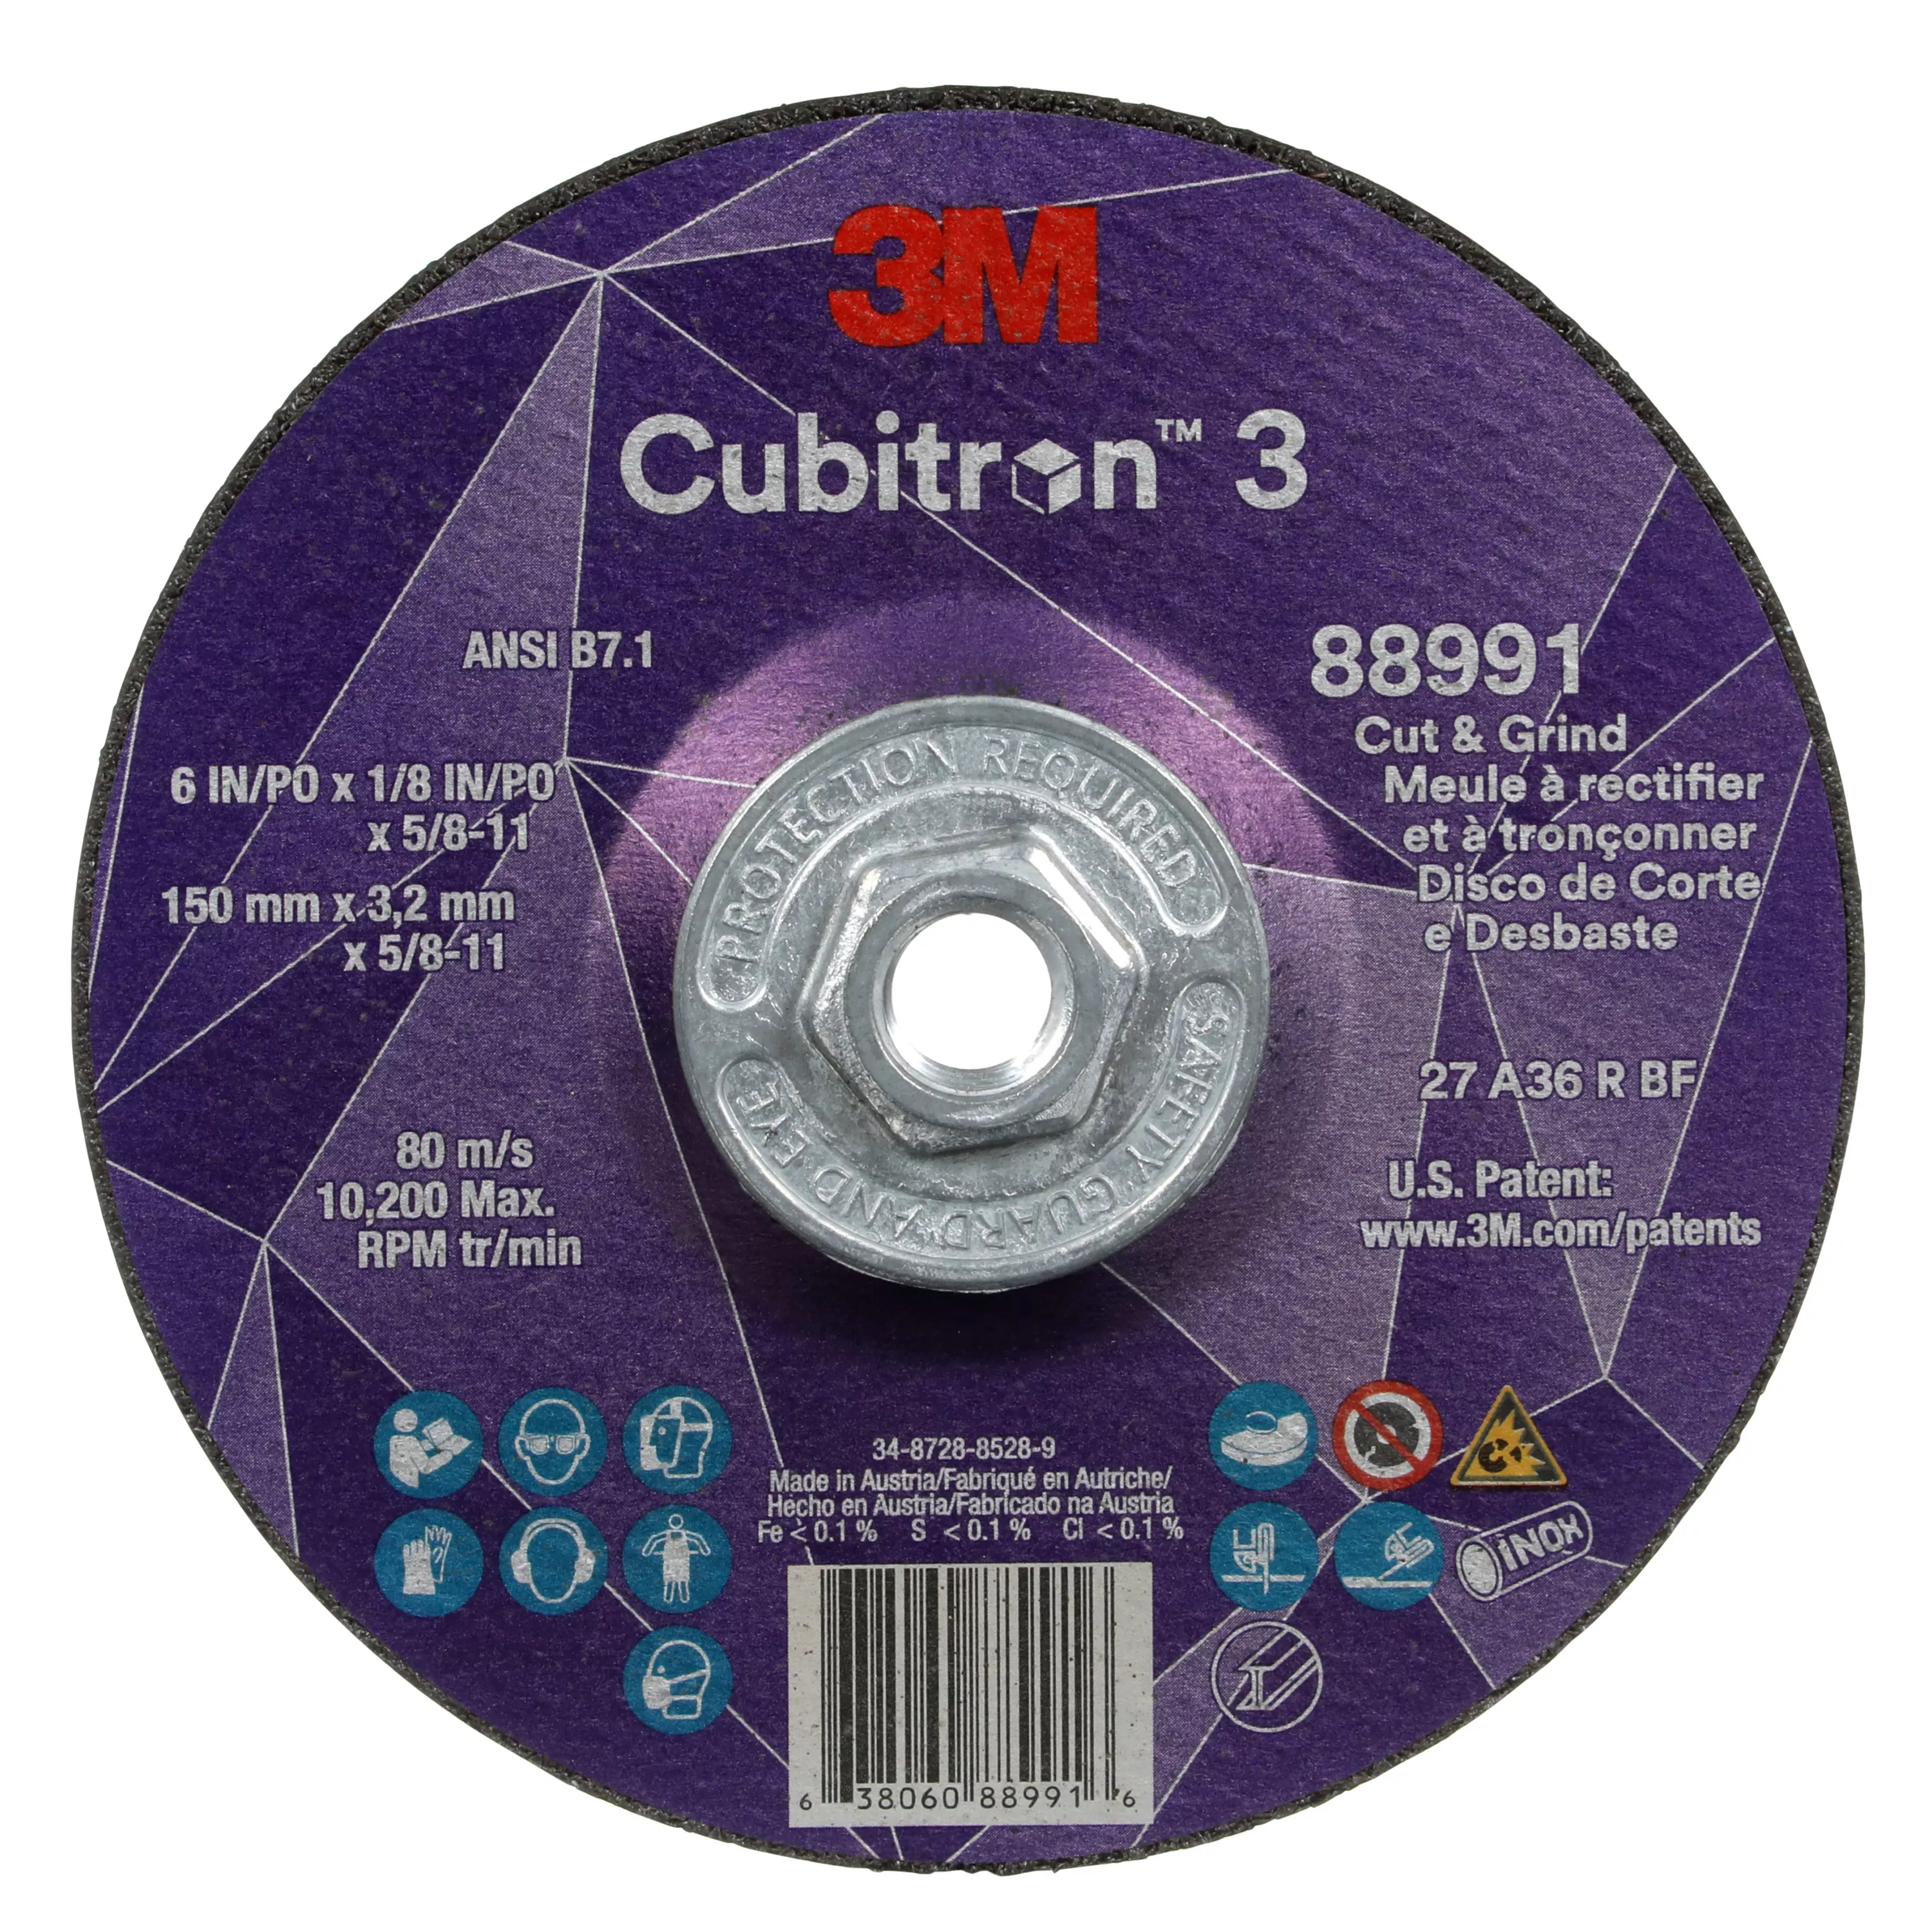 3M™ Cubitron™ 3 Cut and Grind Wheel, 88991, 36+, T27, 6 in x 1/8 in x
5/8 in-11 (150 x 3.2 mm x 5/8-11 in), ANSI, 10 ea/Case